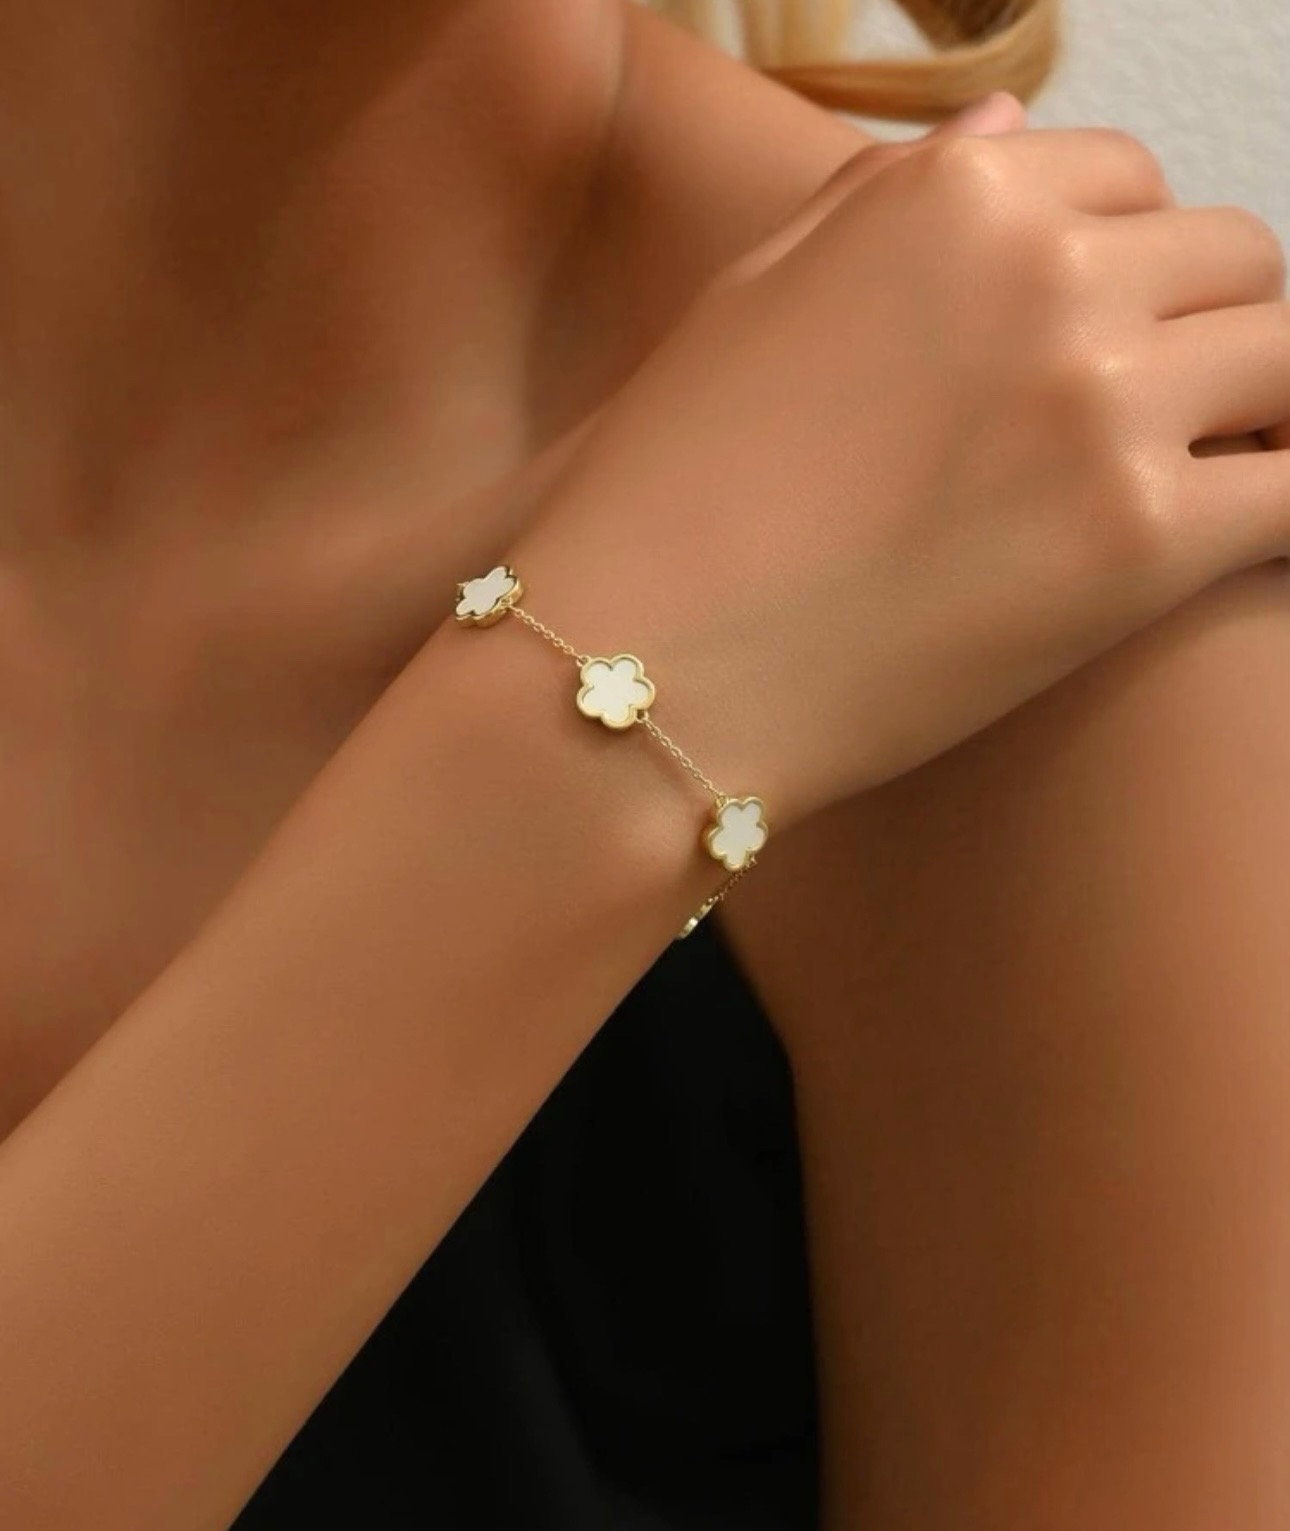 Pin by Bente on Louis Vuitton  Louis vuitton bracelet, Van cleef and  arpels jewelry, Girly jewelry